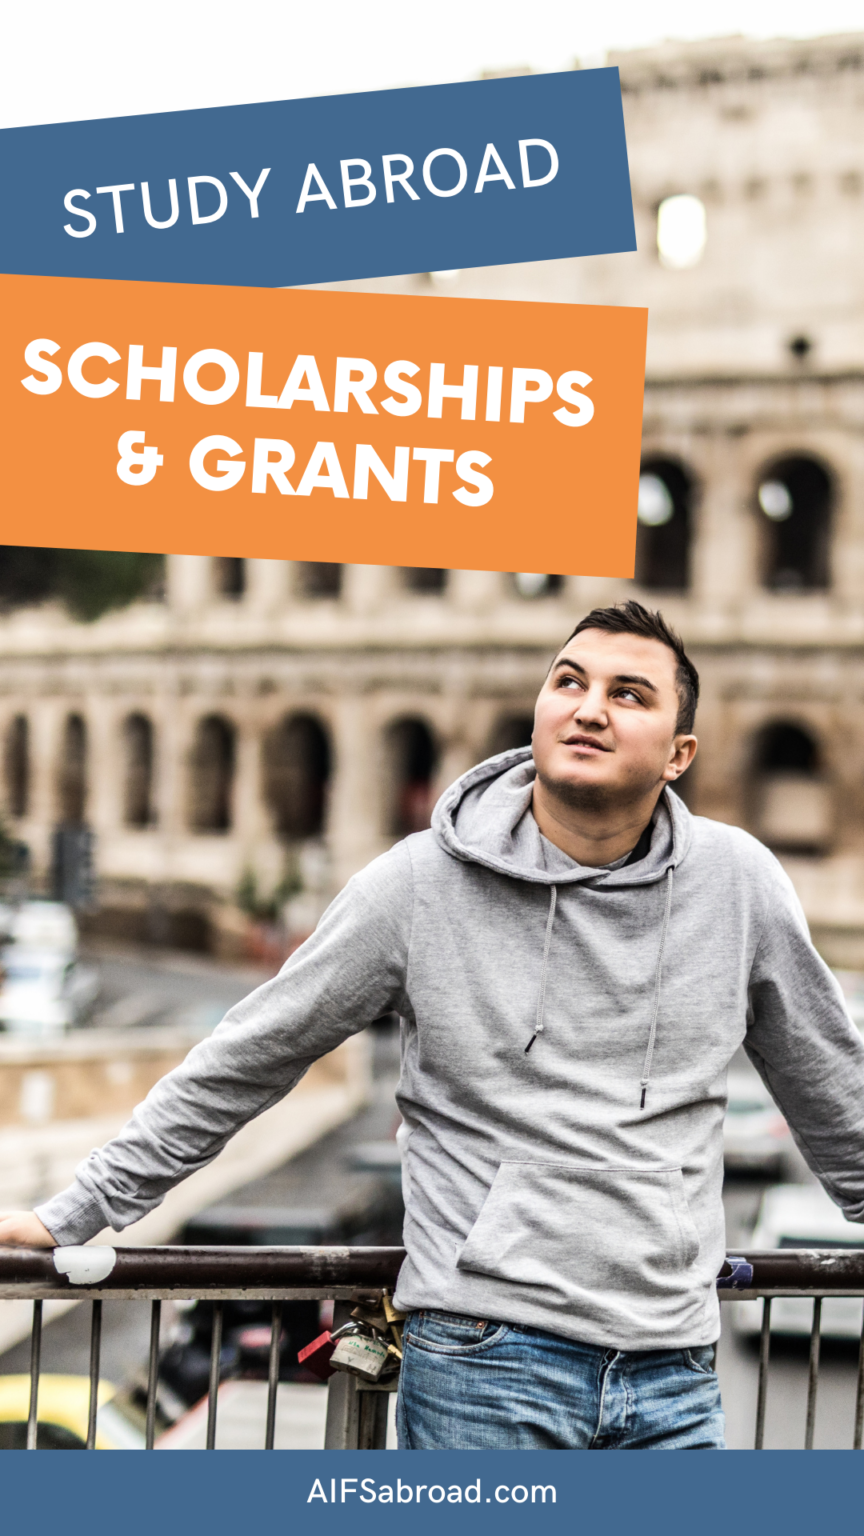 Affording Study Abroad Scholarships, Grants, & More